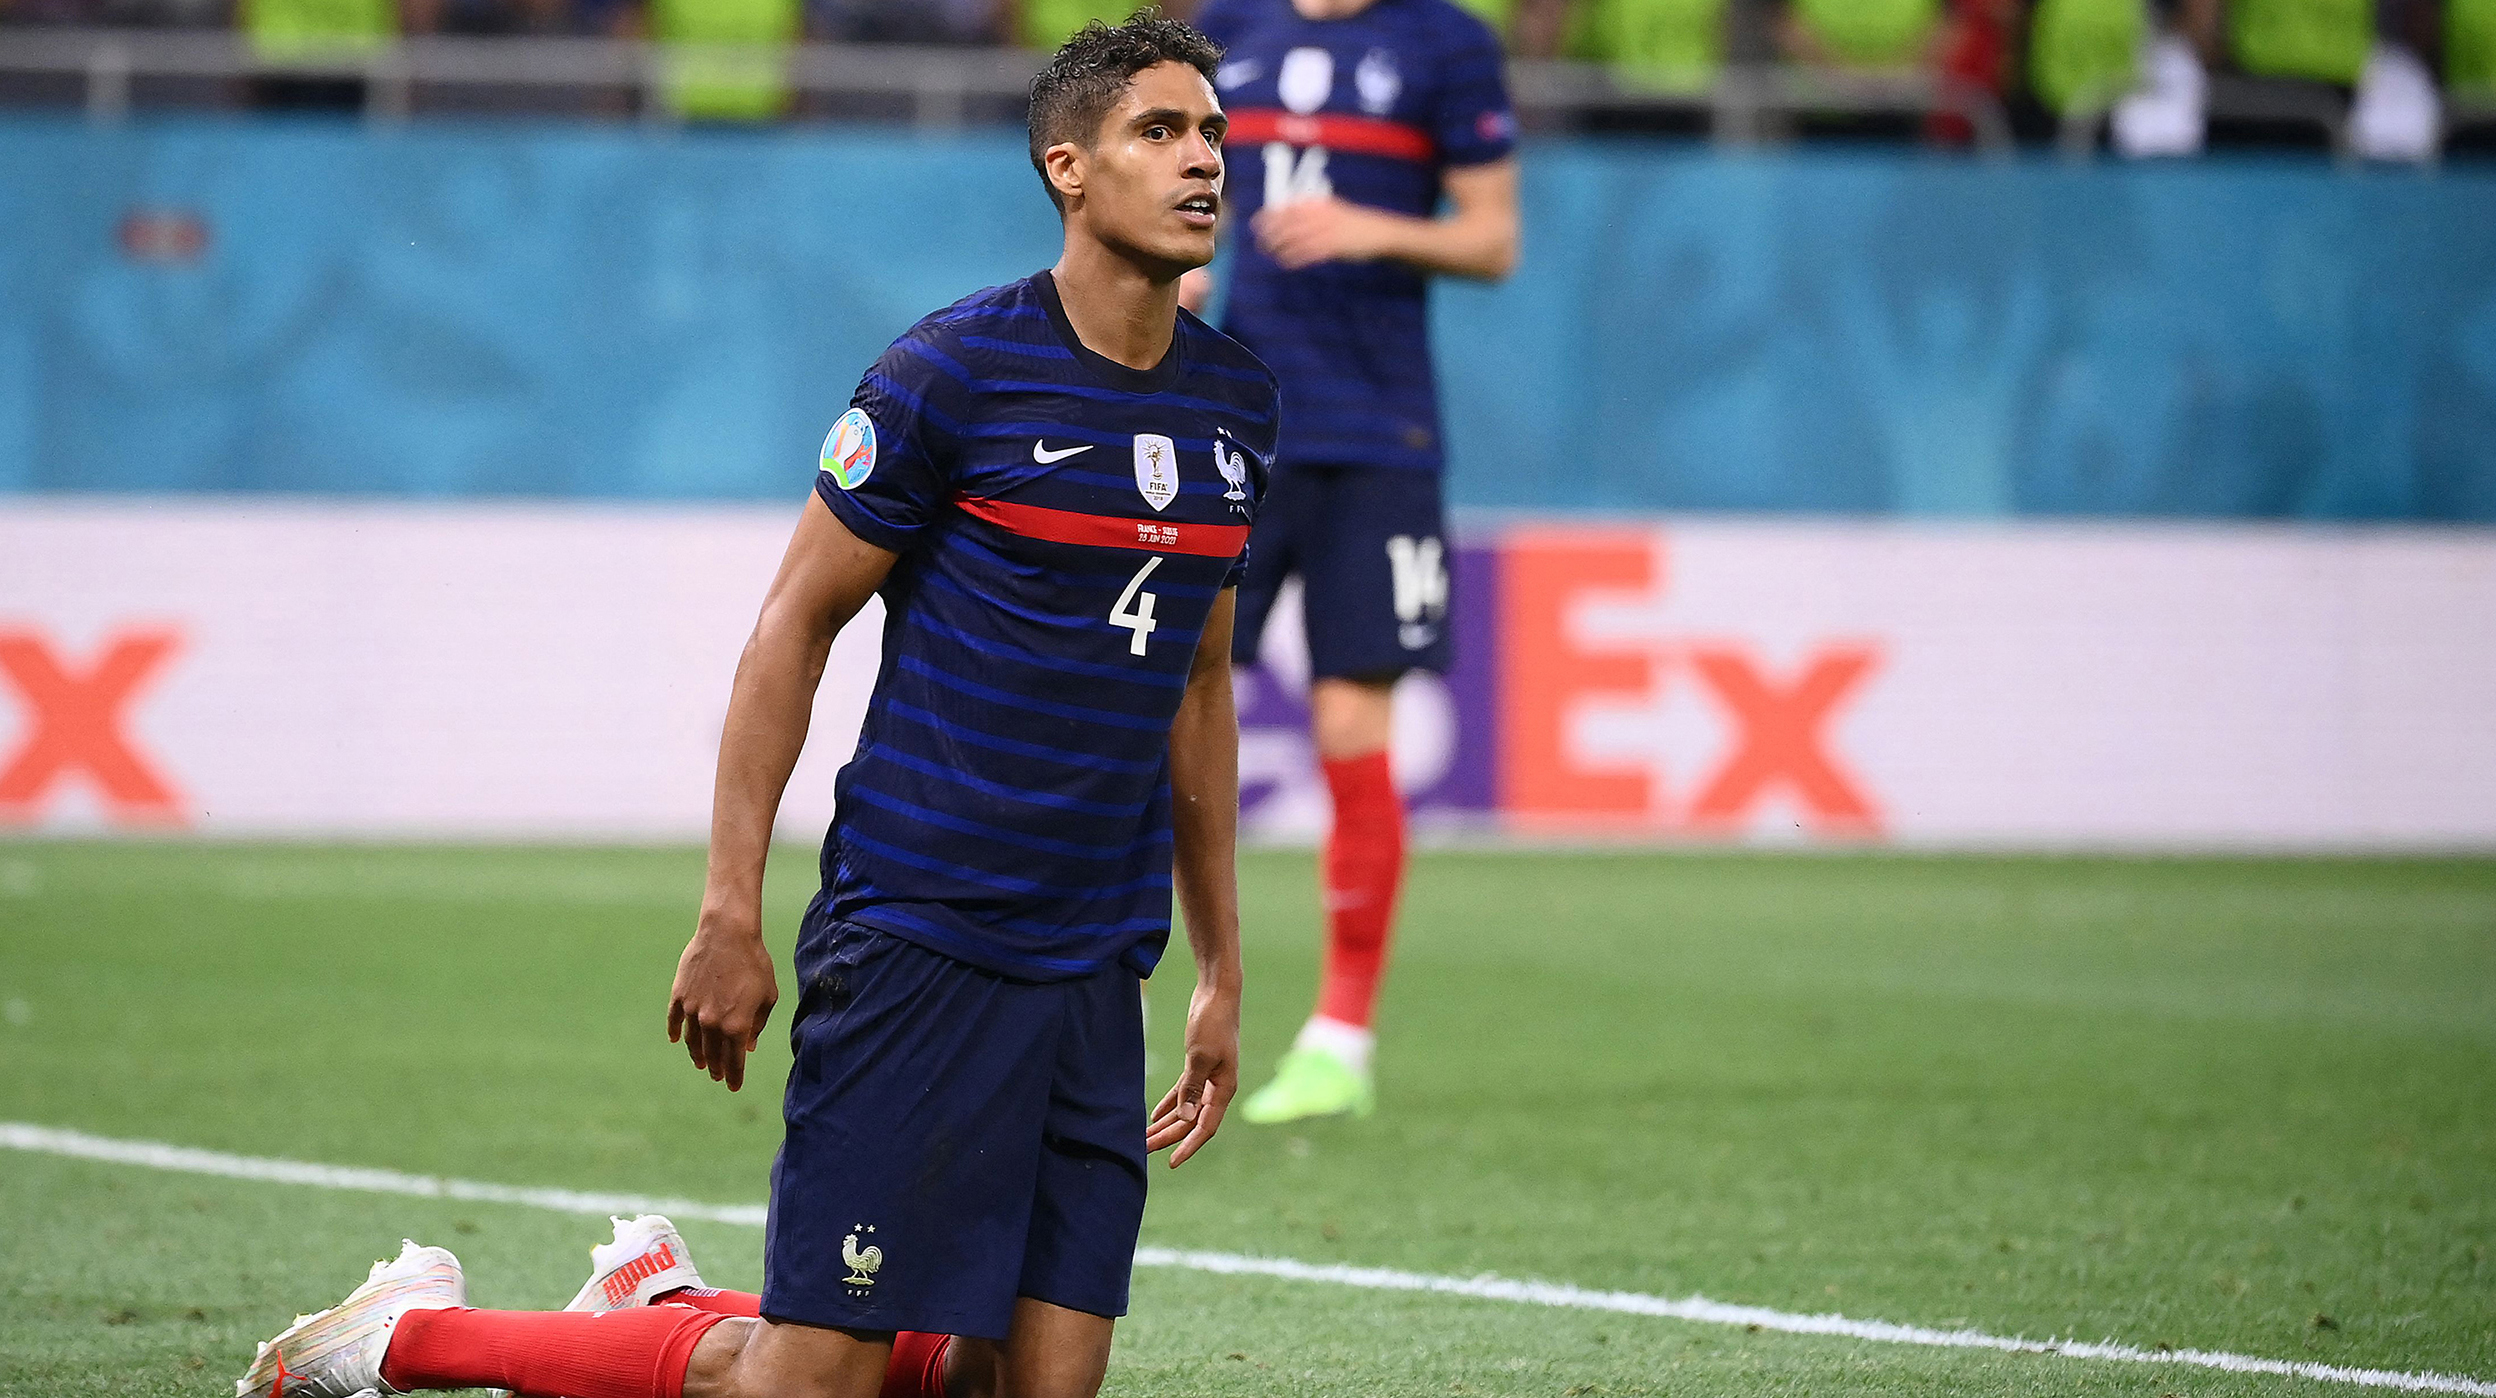 France's defender Raphael Varane gets back on his feet during the UEFA EURO 2020 round of 16 football match between France and Switzerland at the National Arena in Bucharest on June 28, 2021.